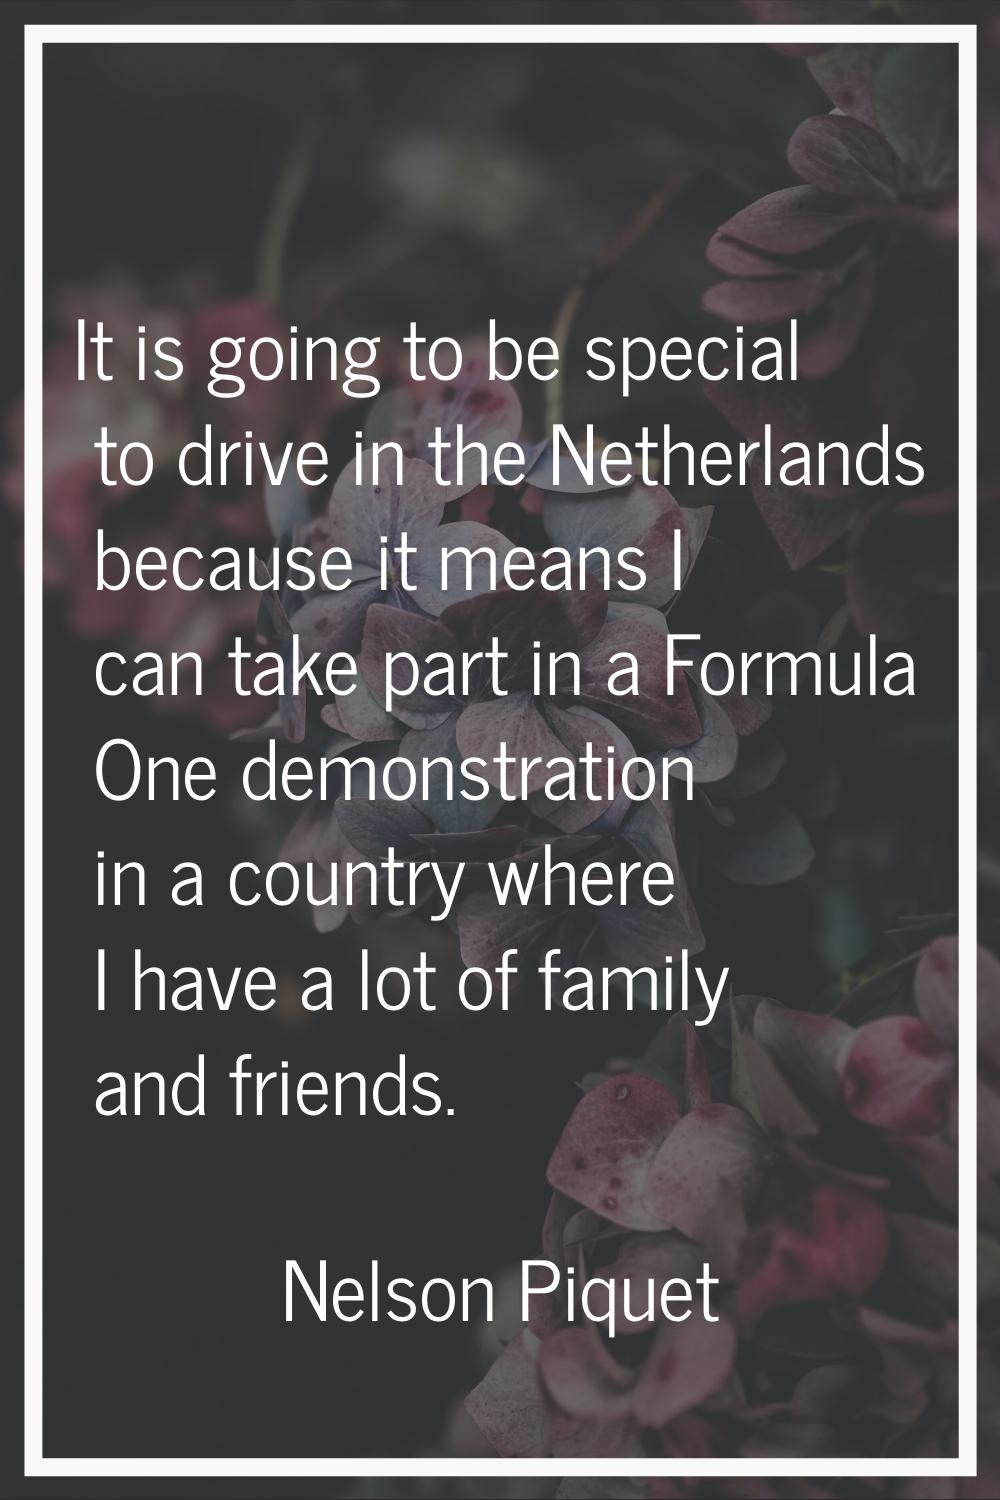 It is going to be special to drive in the Netherlands because it means I can take part in a Formula